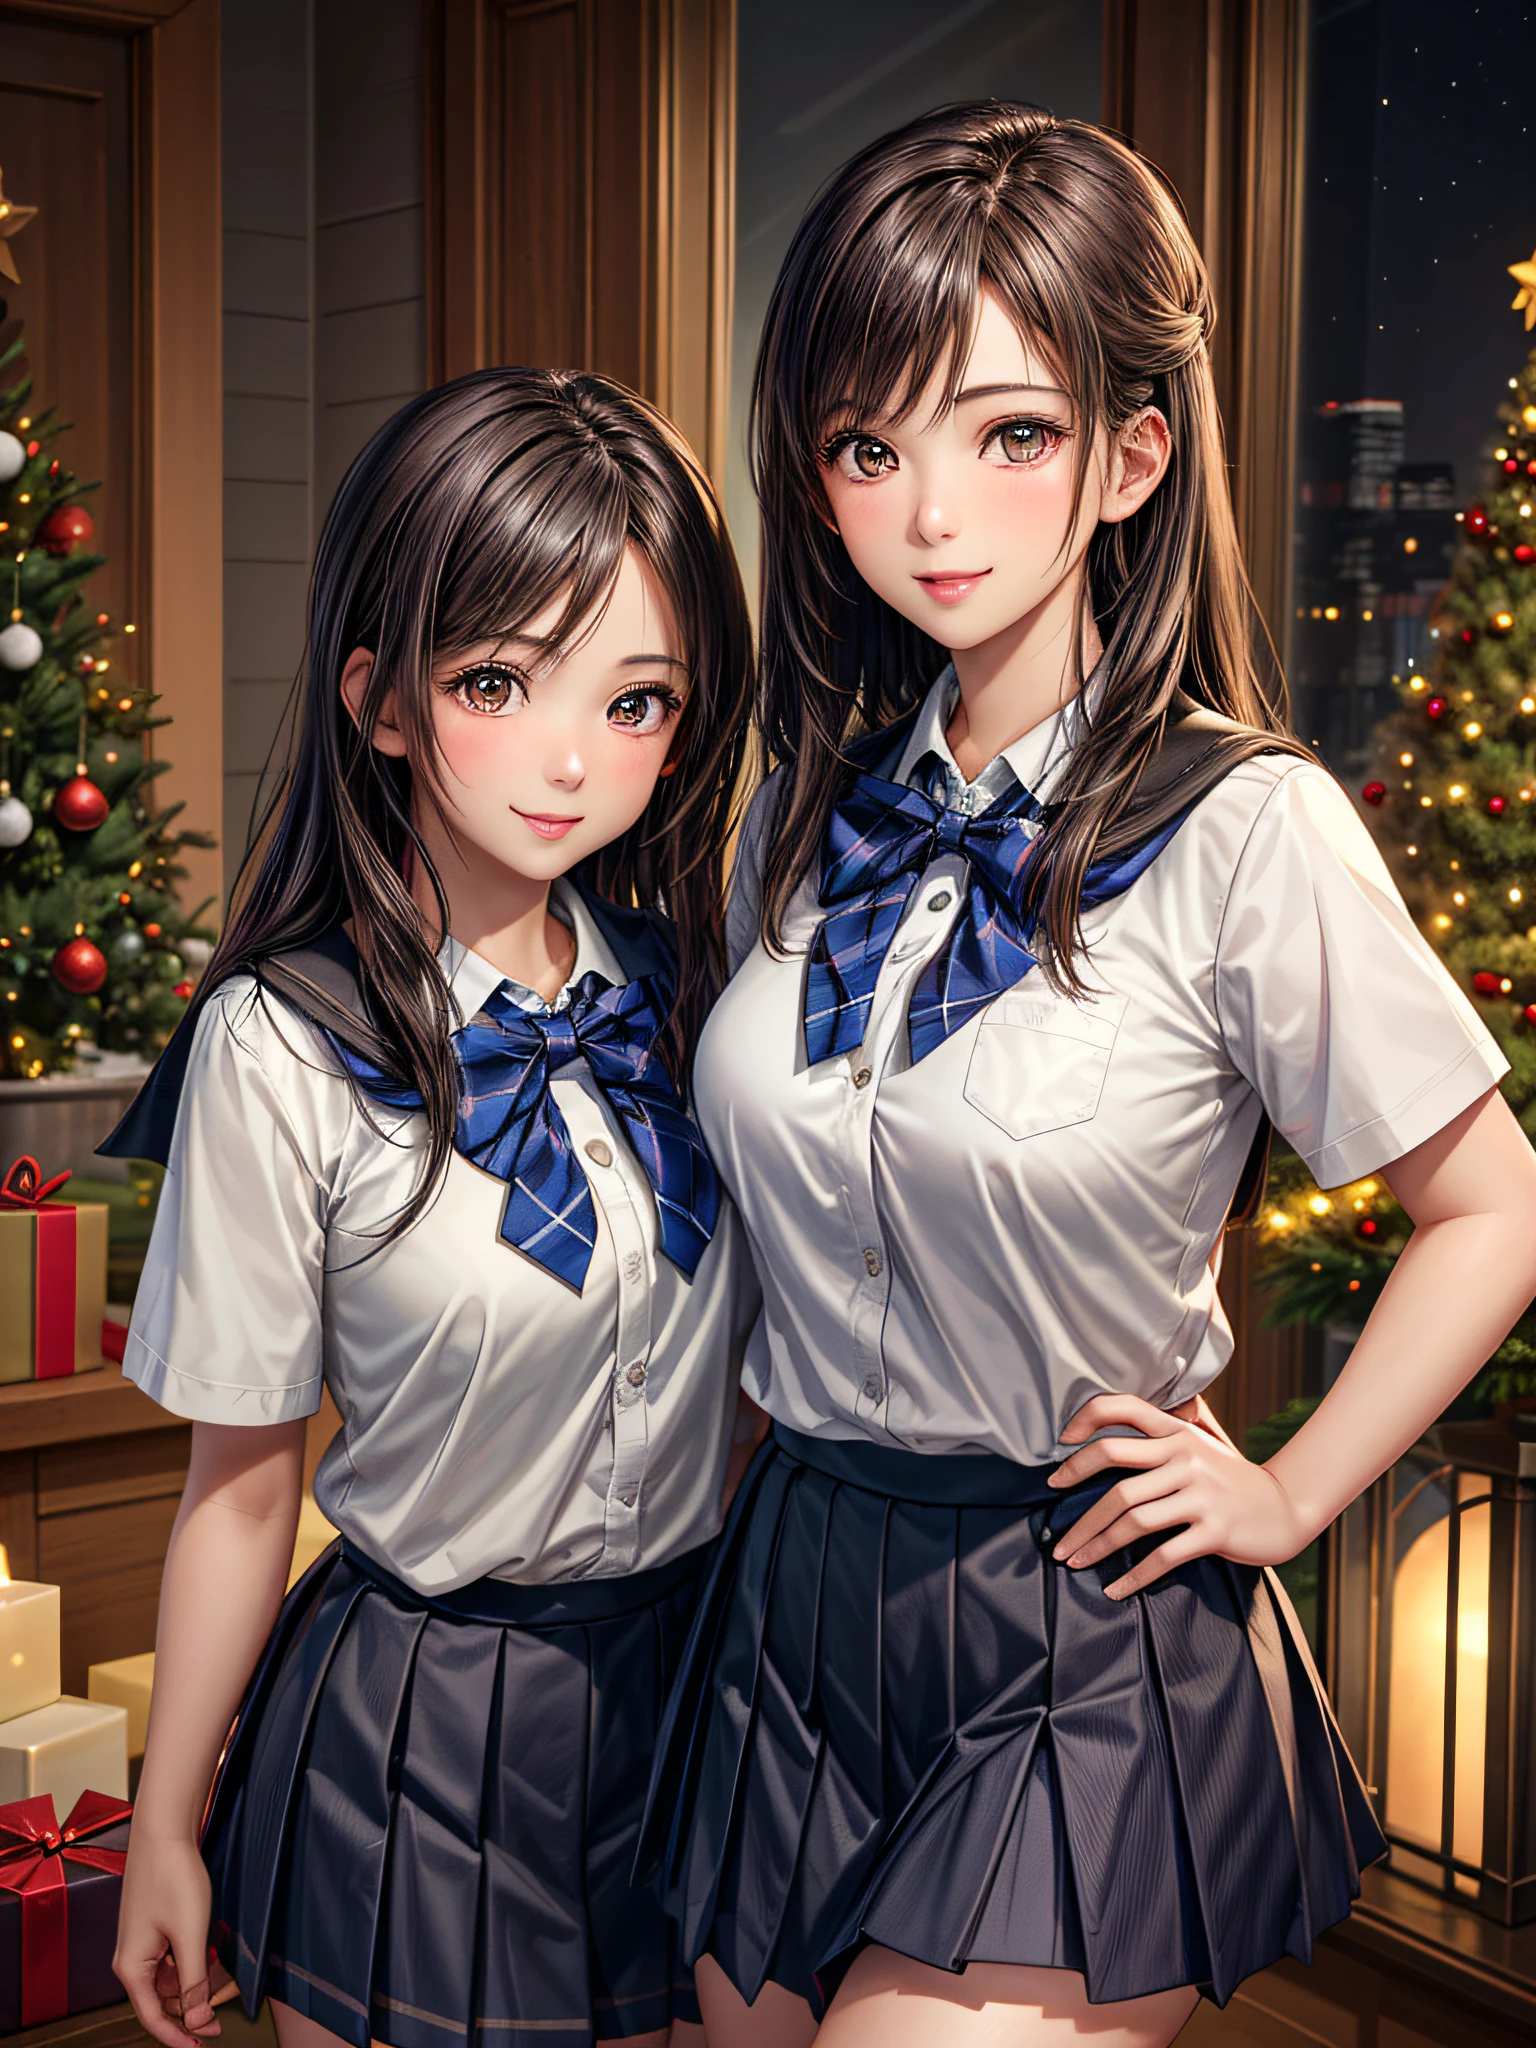 (2girls:1.4), Extremely cute, amazing face and eyes beautiful nice smile), (extremely detailed beautiful face), bright and shiny lips, (School uniform, Pleated skirt:1.3), (Best Quality:1.4), (hyper quality), (Ultra-detailed), (Hyper-realistic, Photorealsitic:1.37), Authentic skin texture, intricate-detail, extremely detailed CG unified 8k wallpaper, RAW Photos, professional photograpy, Cinematic lighting, Exposing, Christmas tree, Christmas Ornaments, Christmas Decorations, Christmas Lights, Christmas Lights,